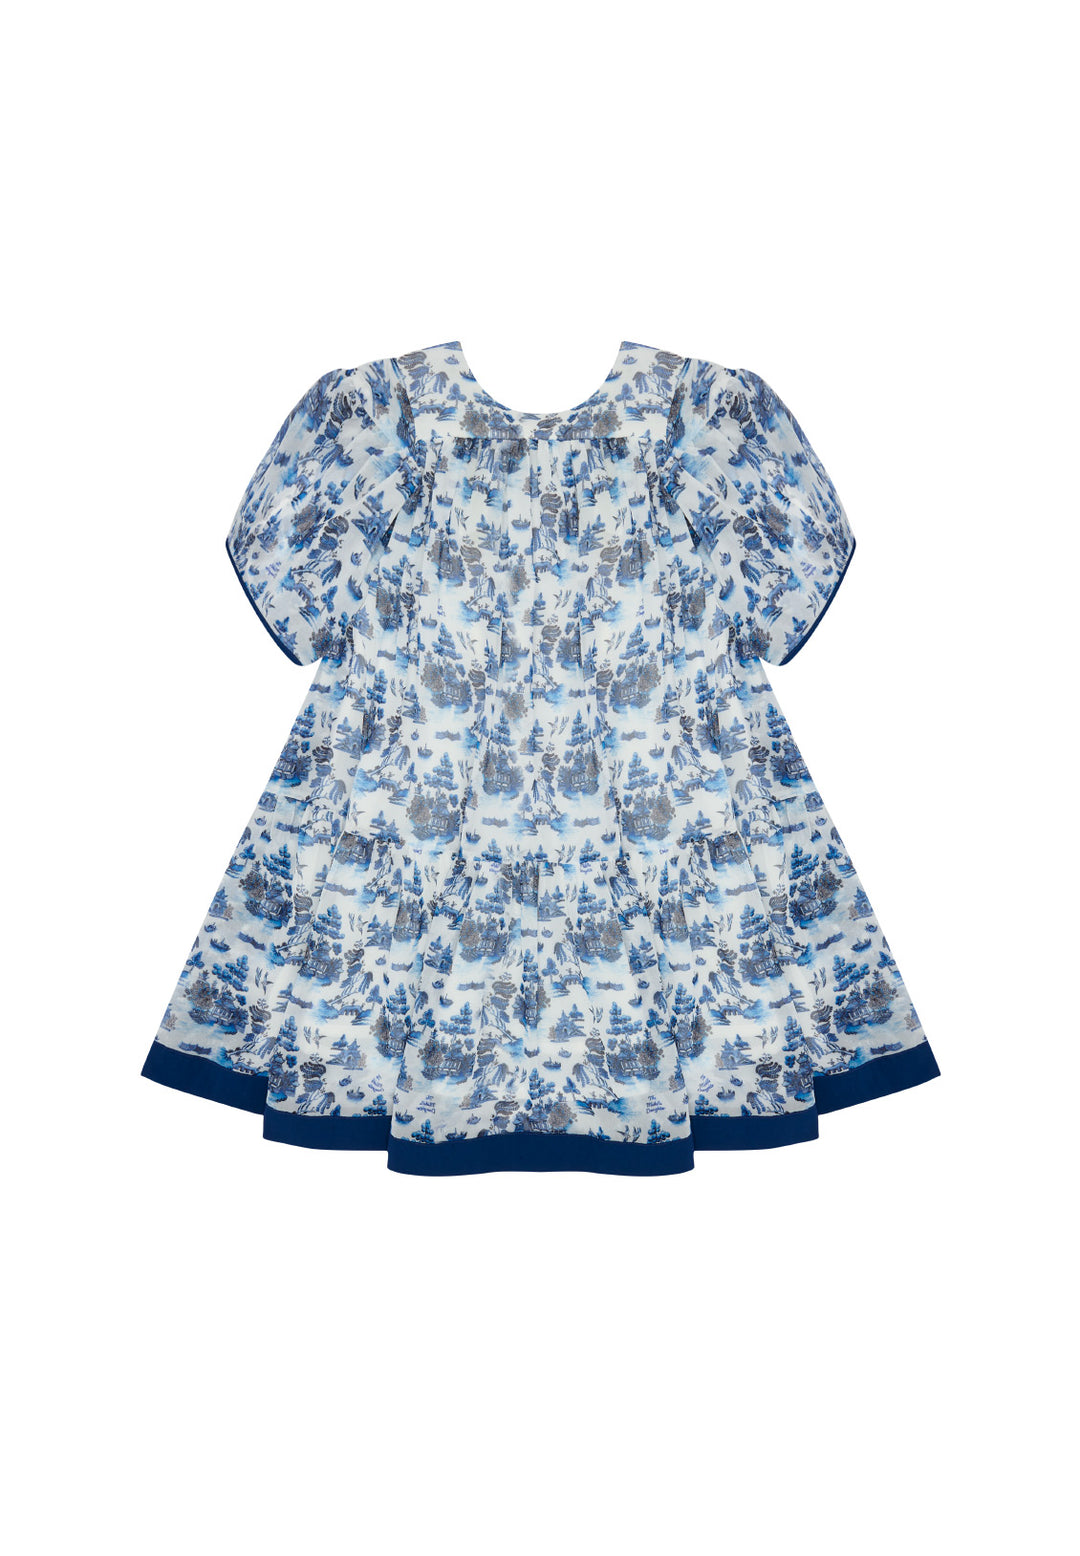 FLOAT YOUR BOAT SPECIAL LENGTH DRESS-WILLOW PATTERN